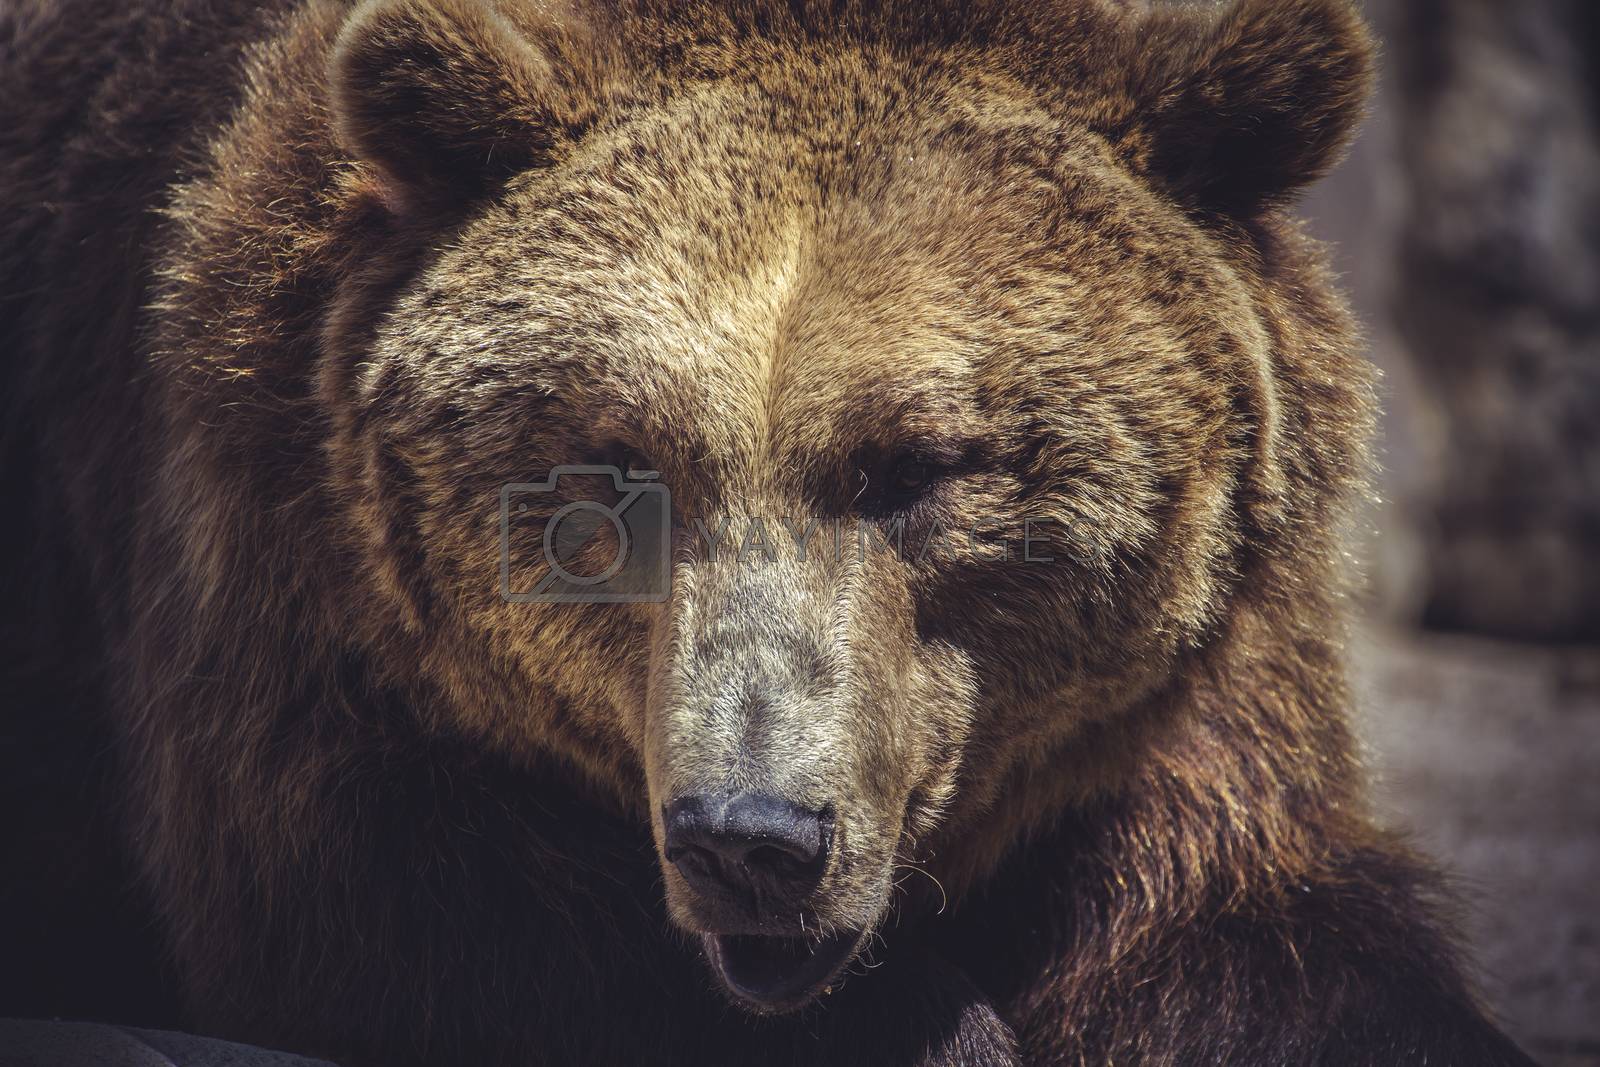 Royalty free image of wildlife, Spanish powerful brown bear, huge and strong wild ani by FernandoCortes